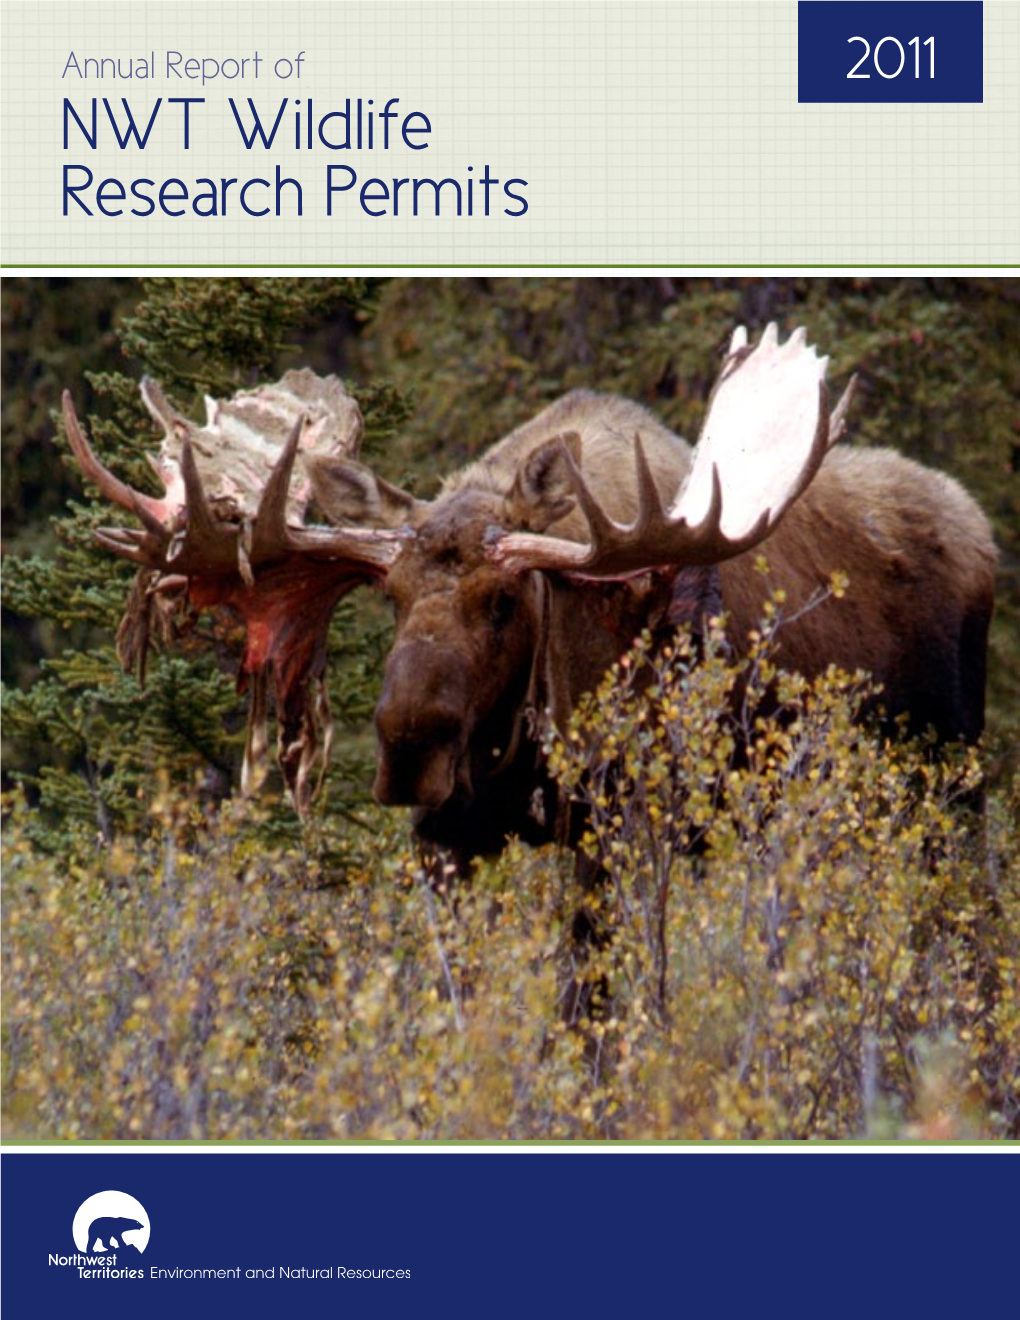 NWT Wildlife Research Permits Cover Photo: N